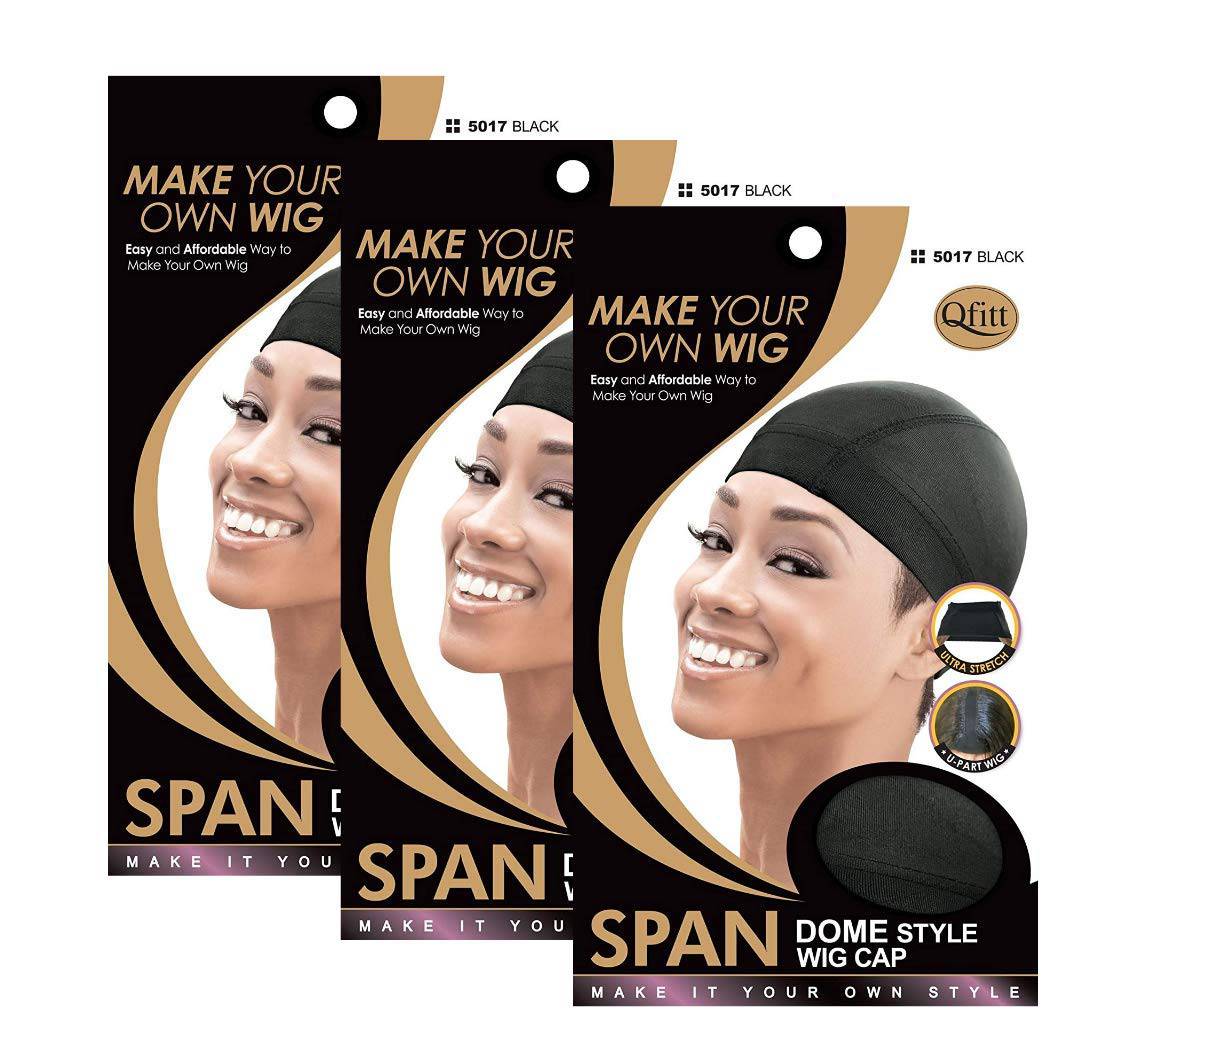 Qfitt Span Dome Style Wig Cap - VIP Extensions